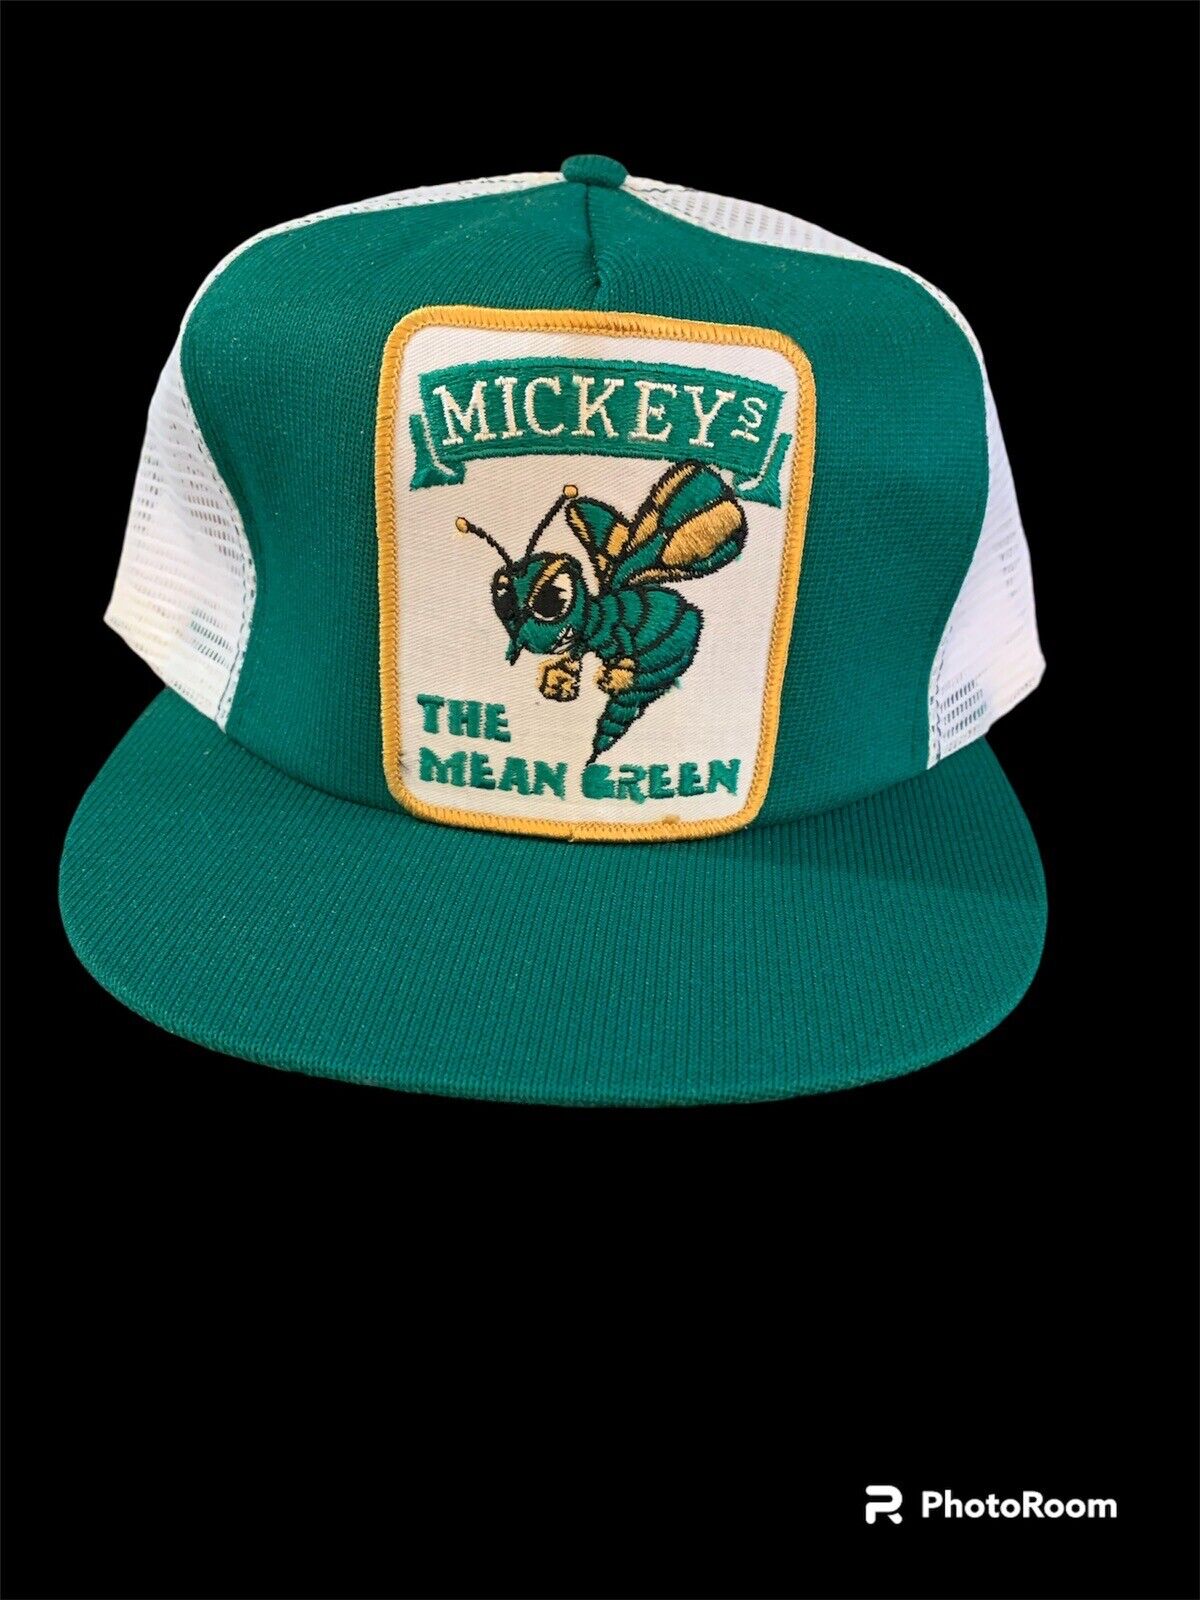 Vintage Mickeys The Mean Green Patch Hat Made In USA Mesh Snap Back Trucker Hat